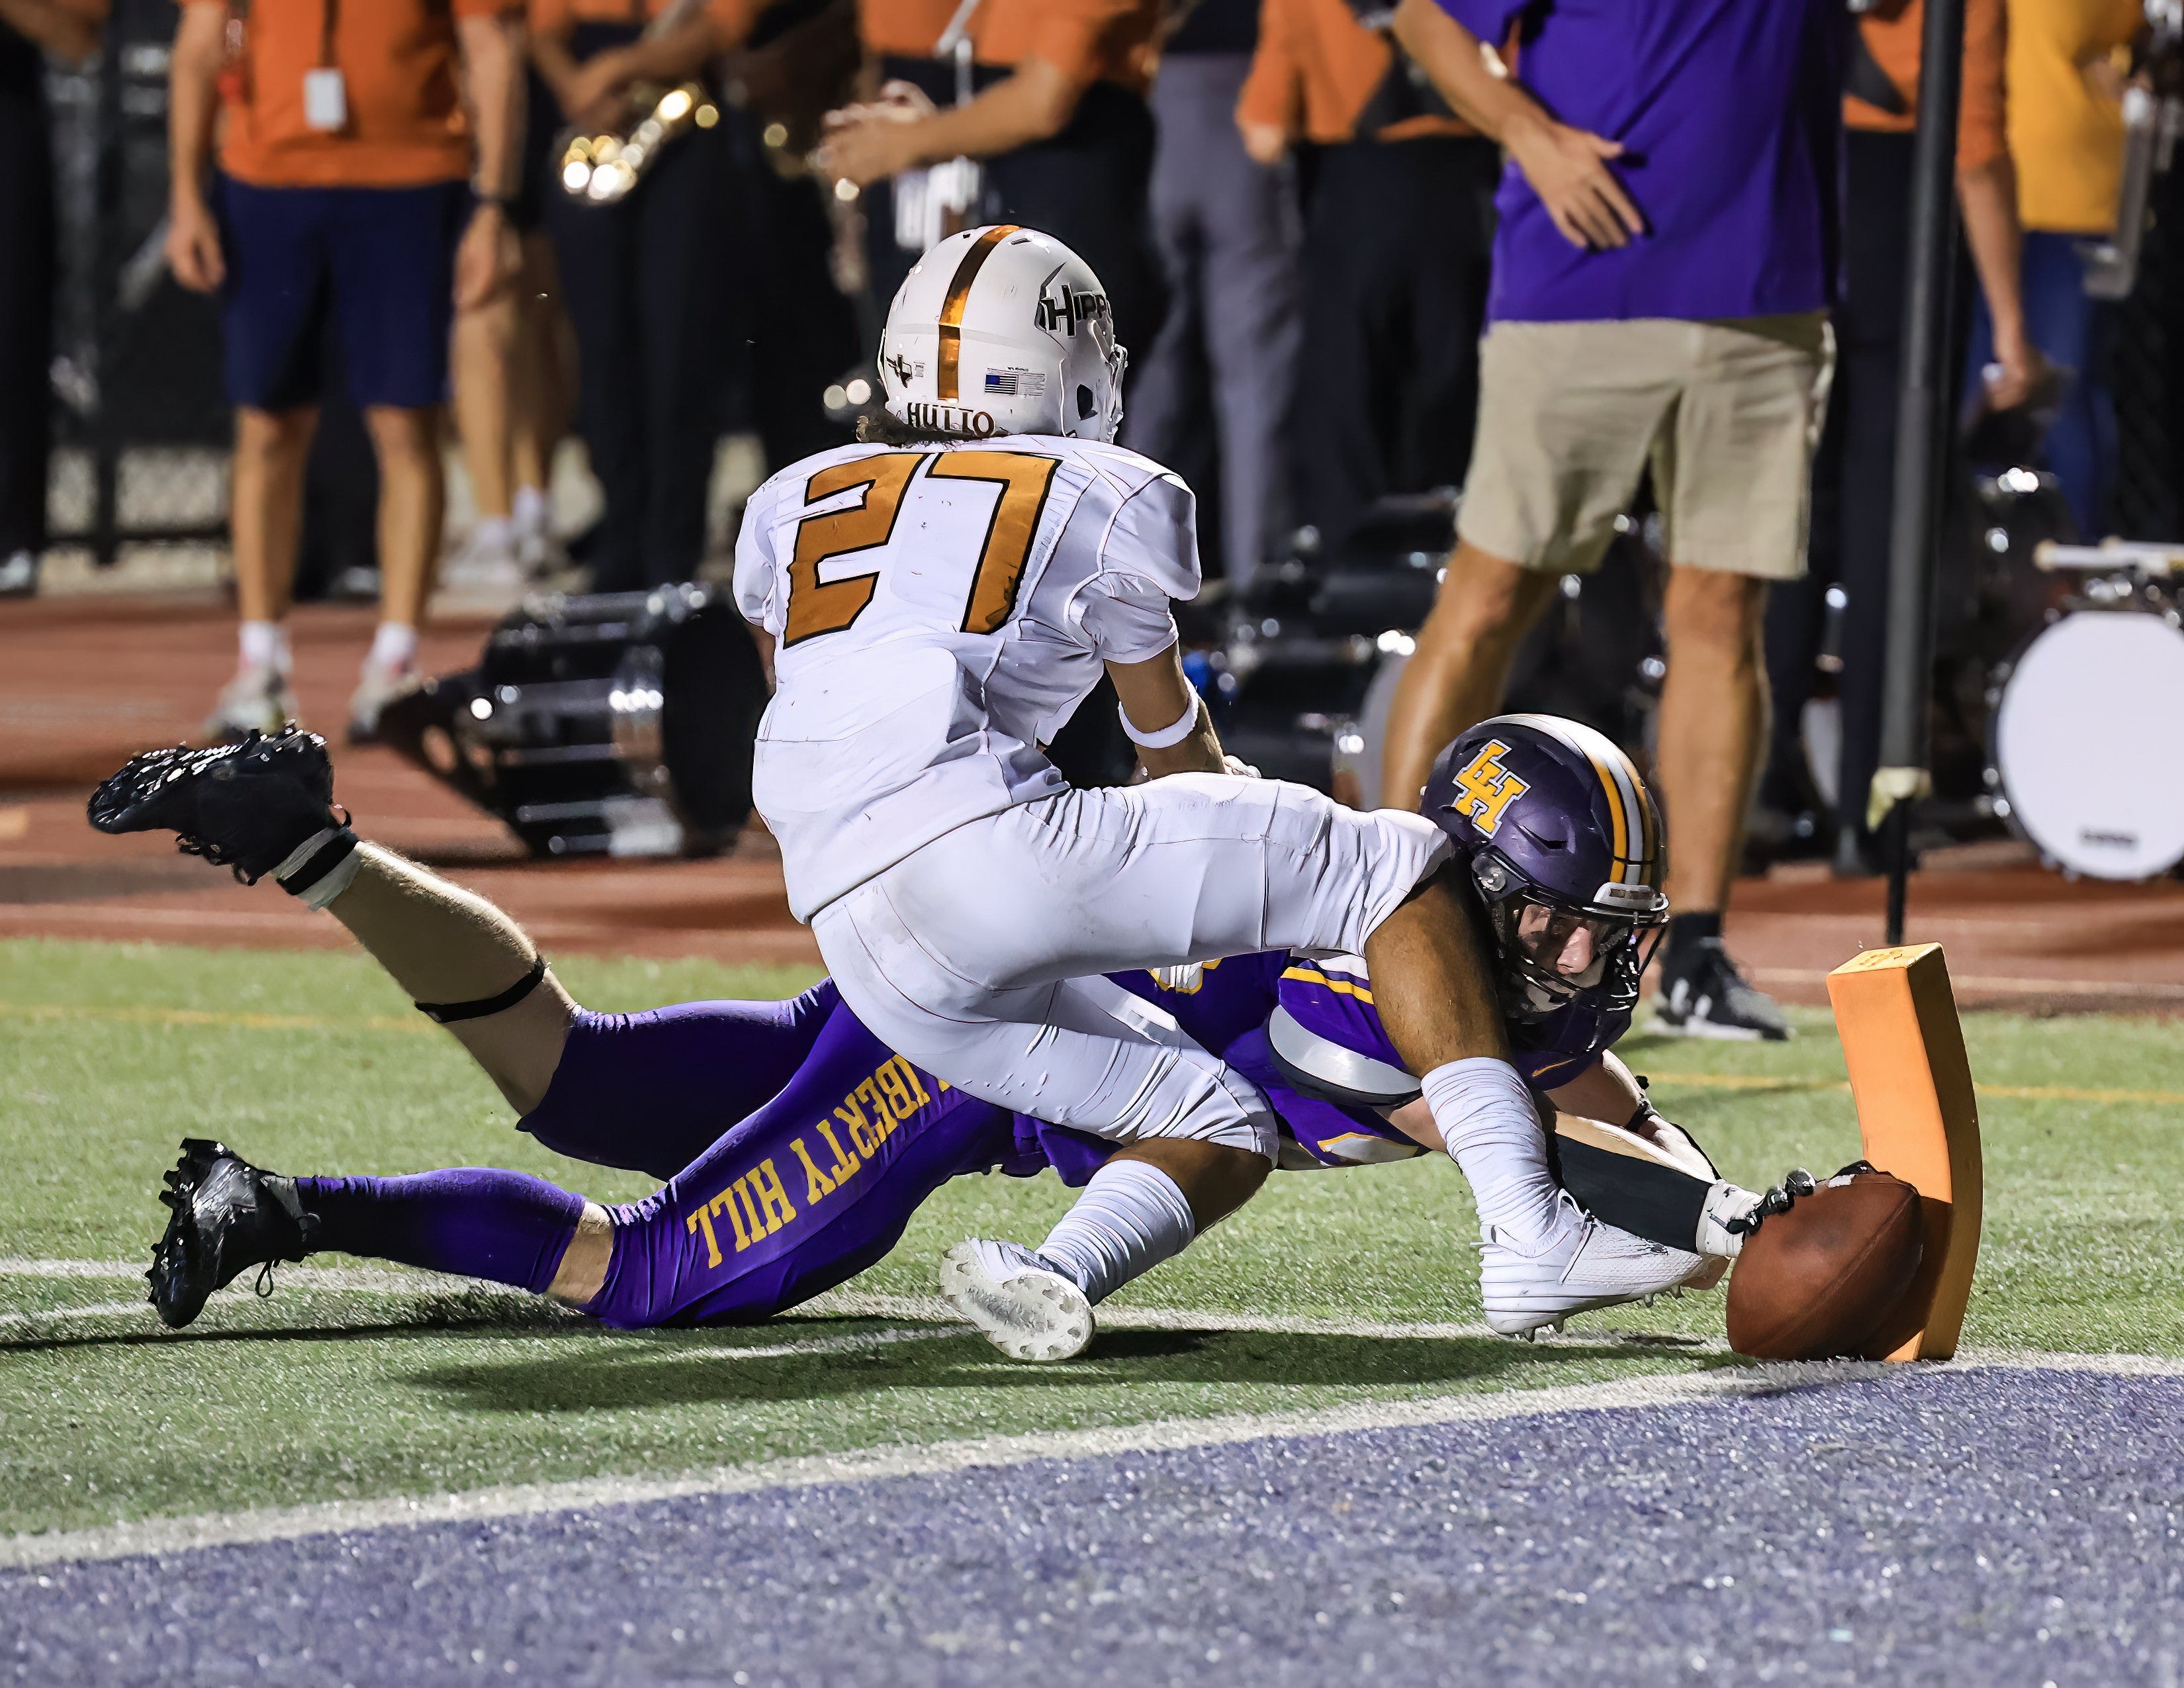 Liberty Hill outlasts Hutto 8280 — in high school football, not basketball